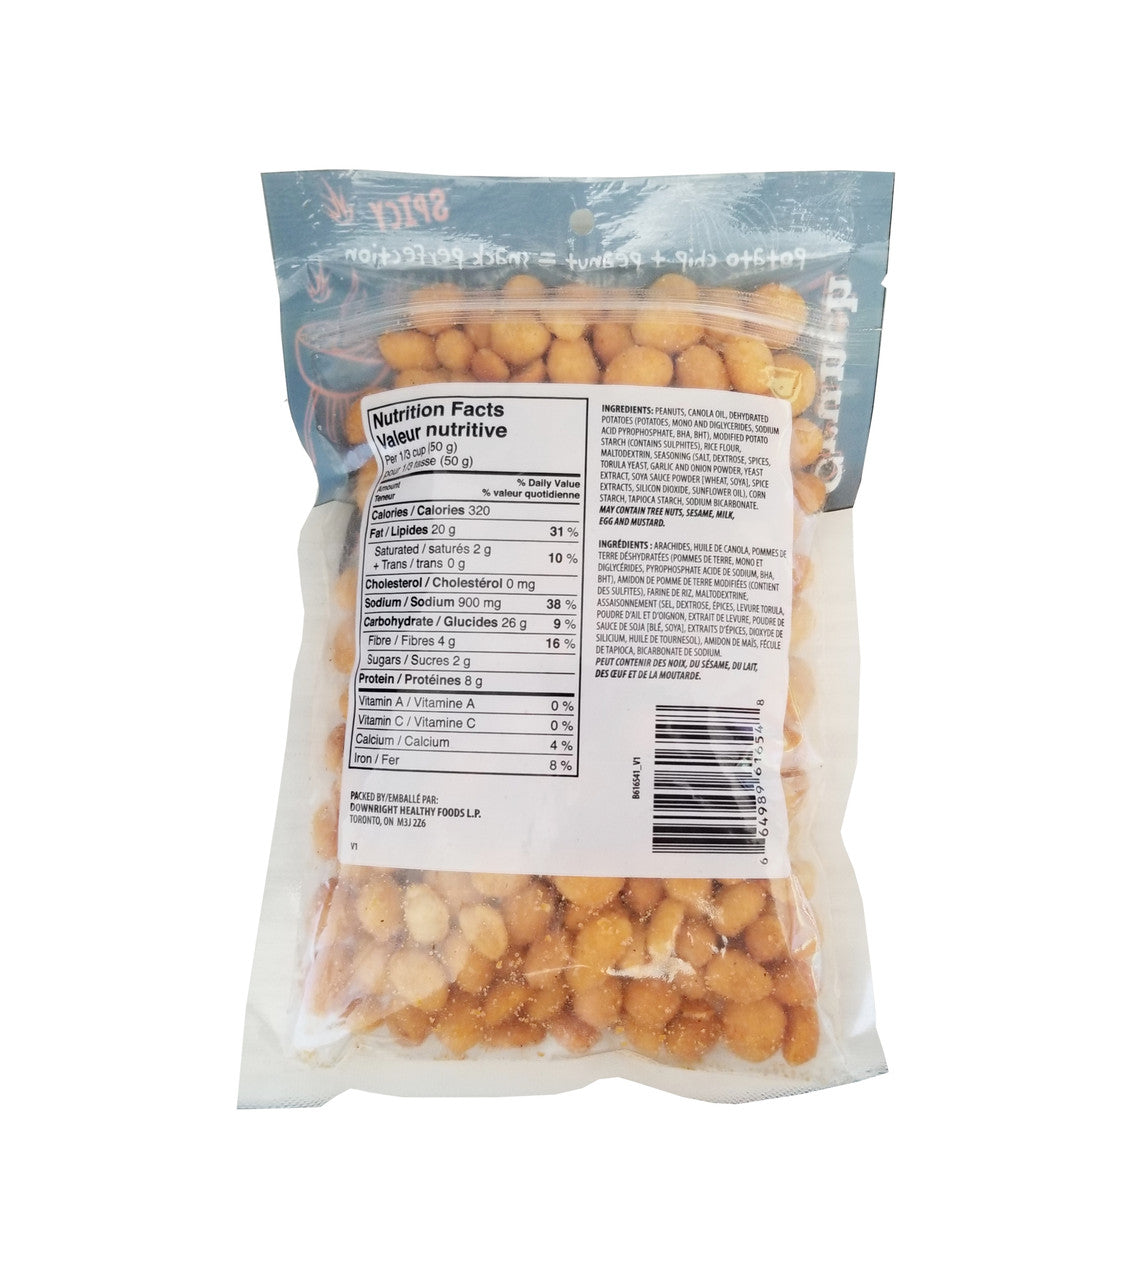 Joe's Tasty Travels, BBQ Chipnuts, 250g/8.75 oz. Bag {Imported from Canada}